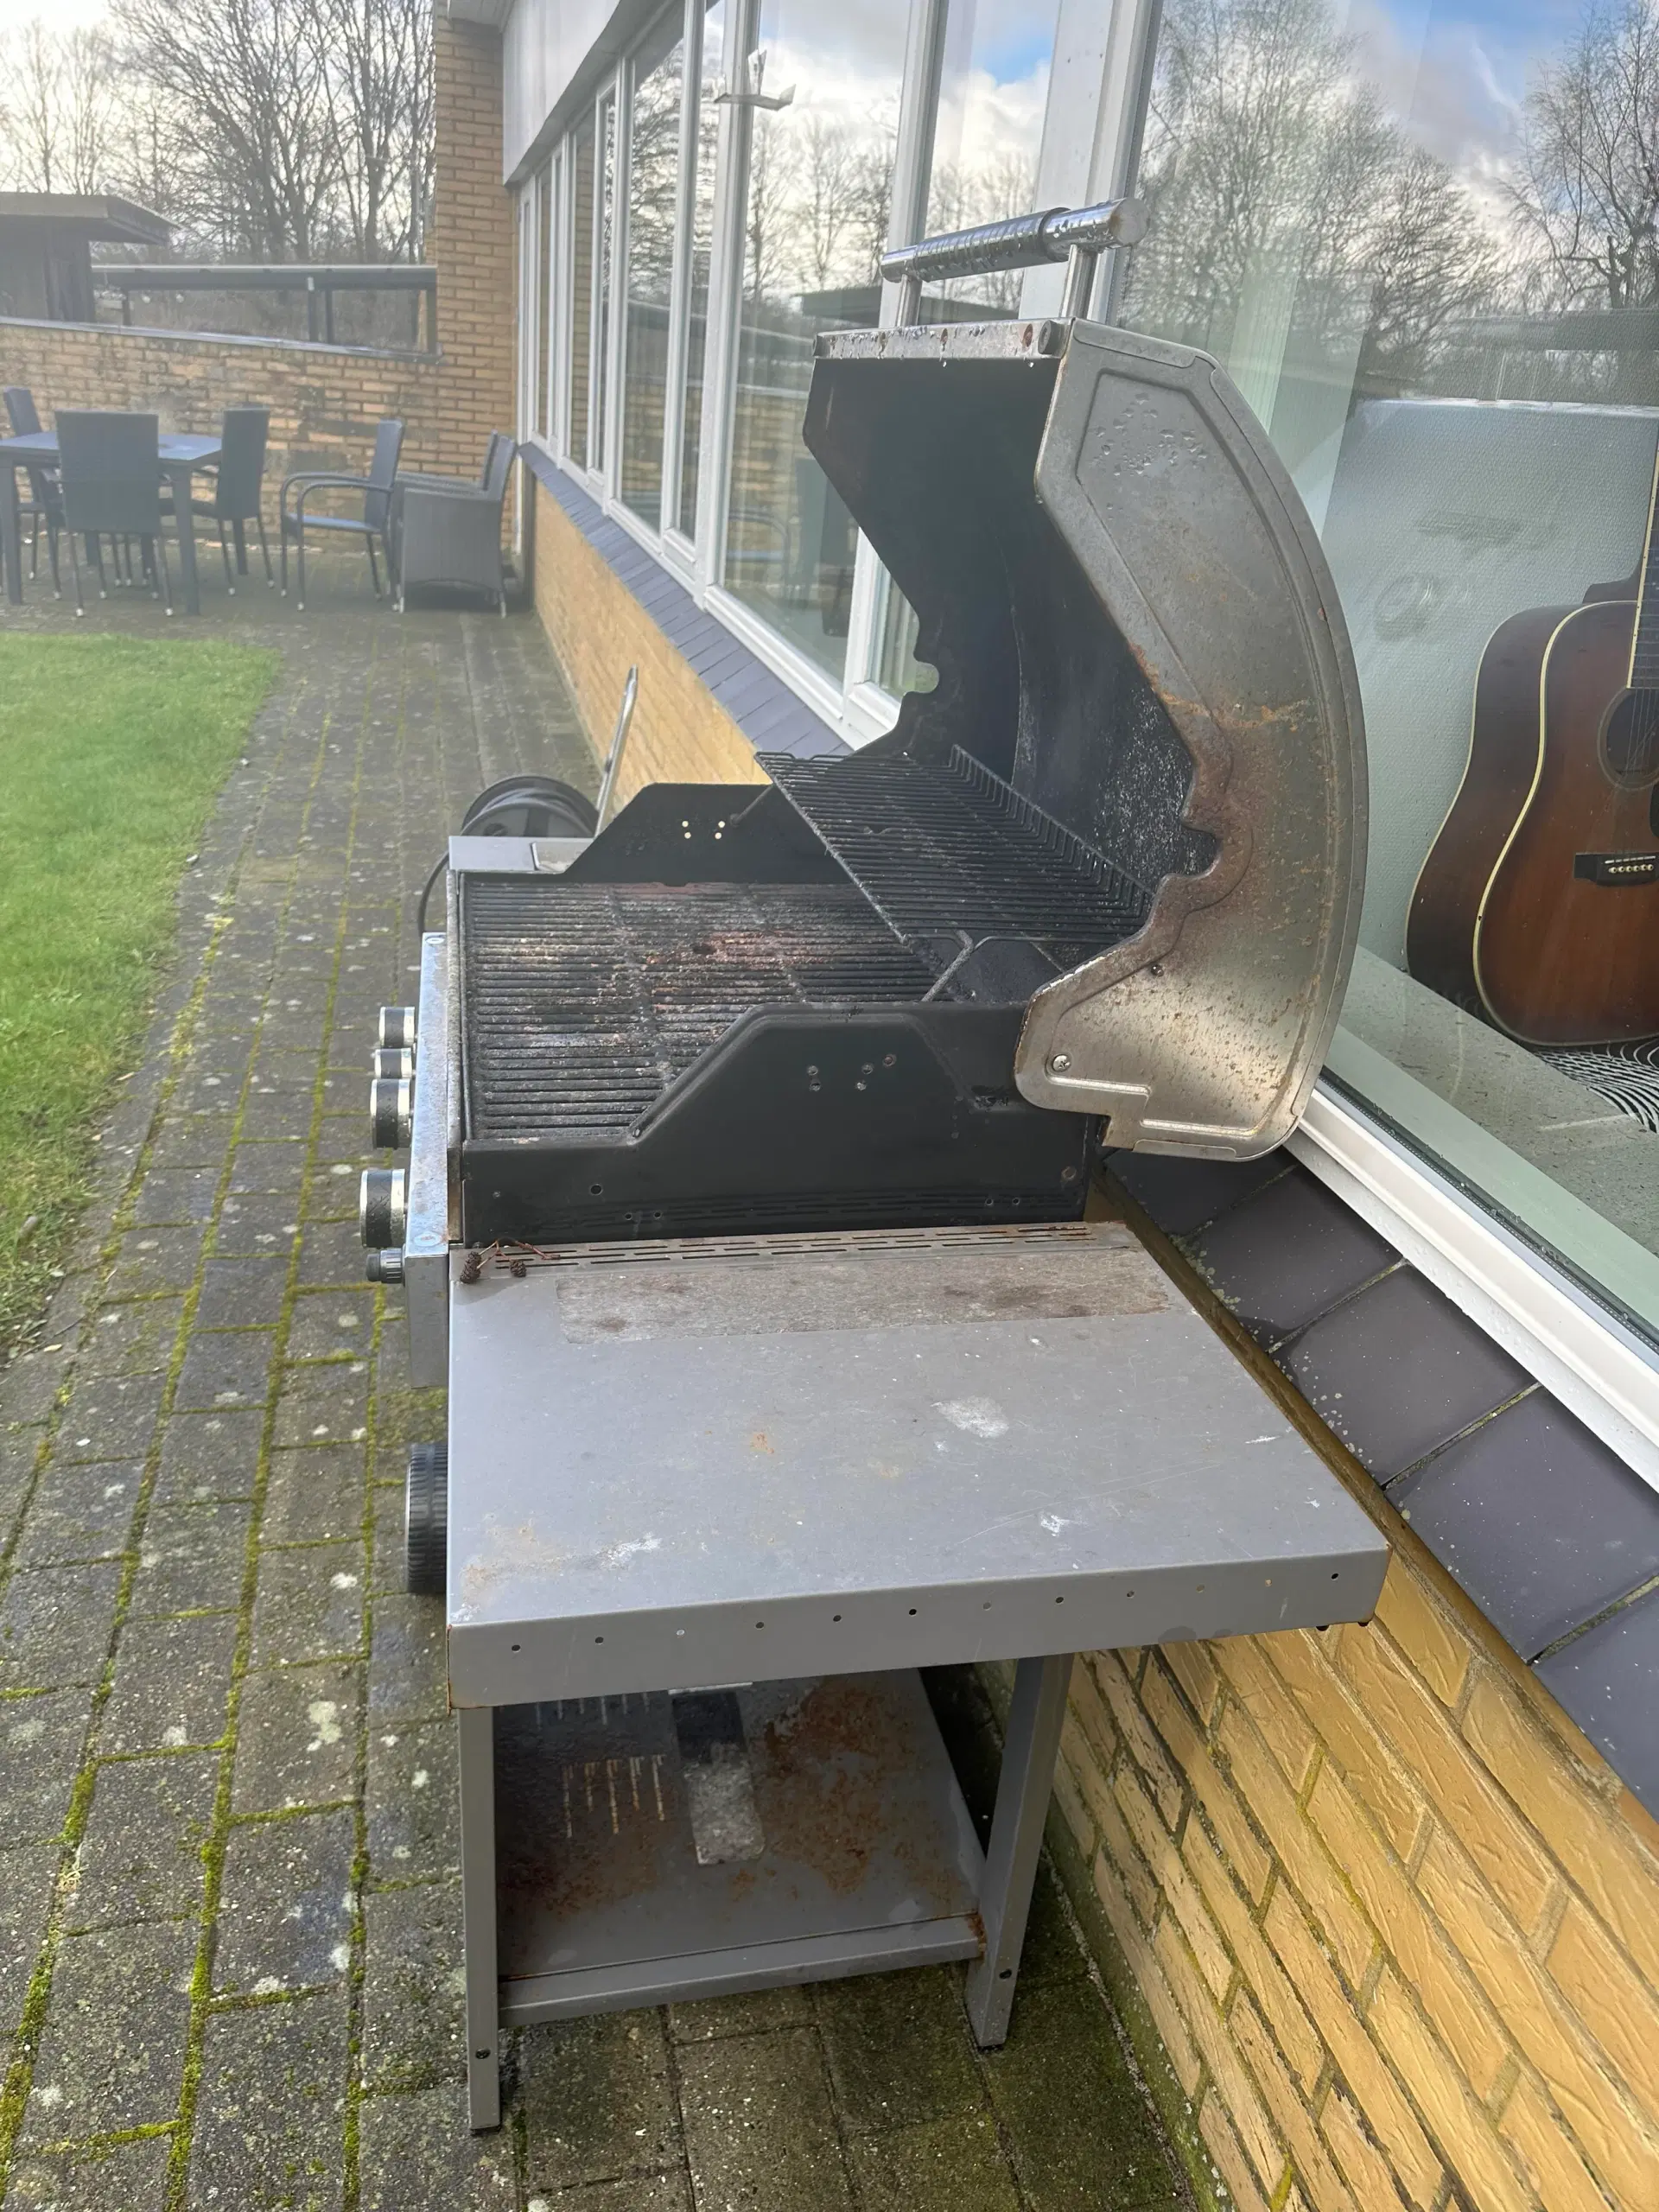 CharBroil grill sælges